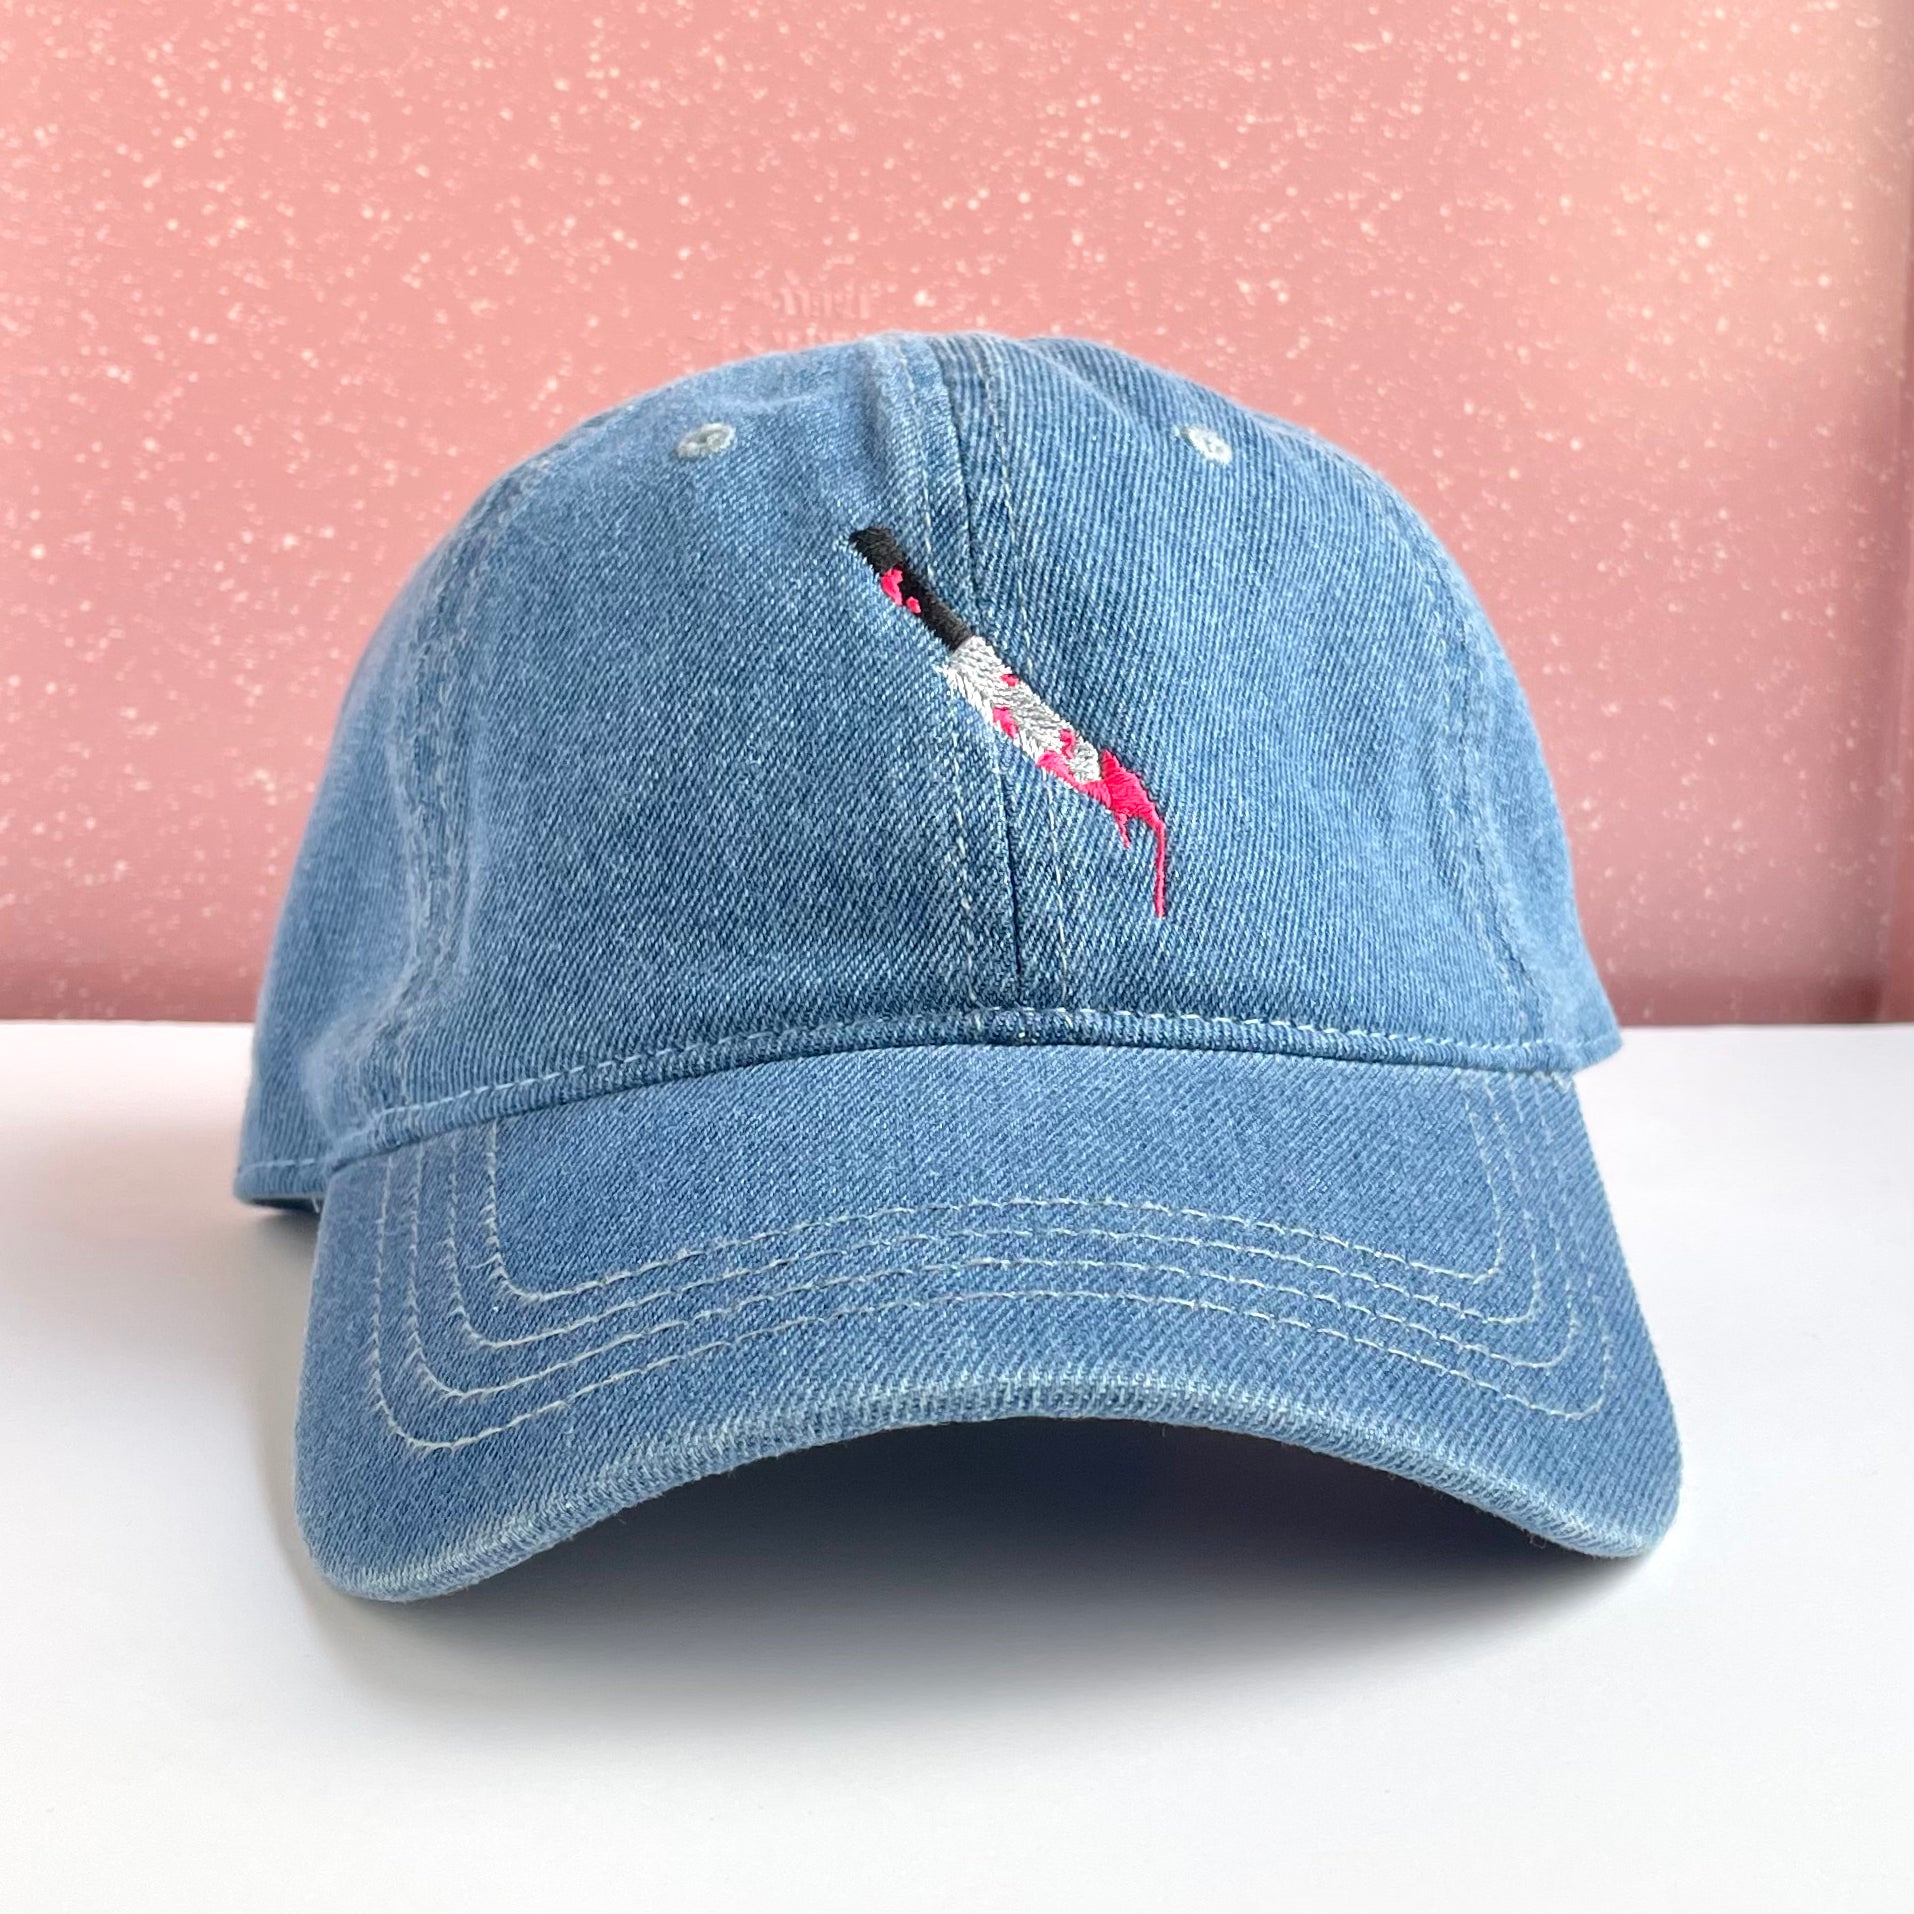 BLOODY KNIFE DAD HAT